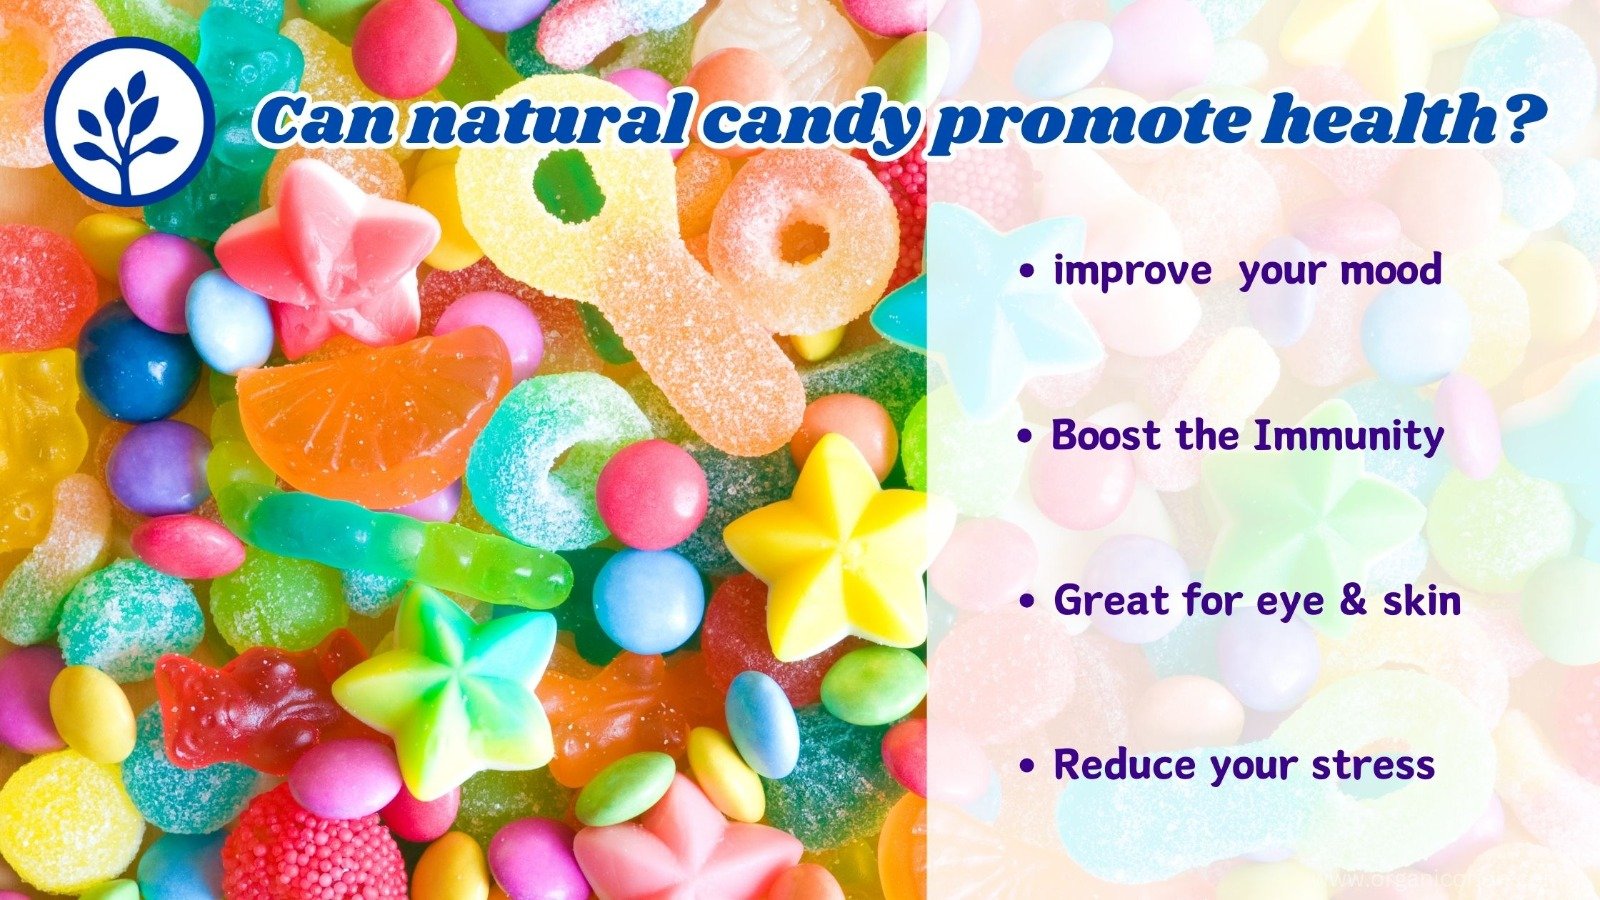 Can natural candy promote health?